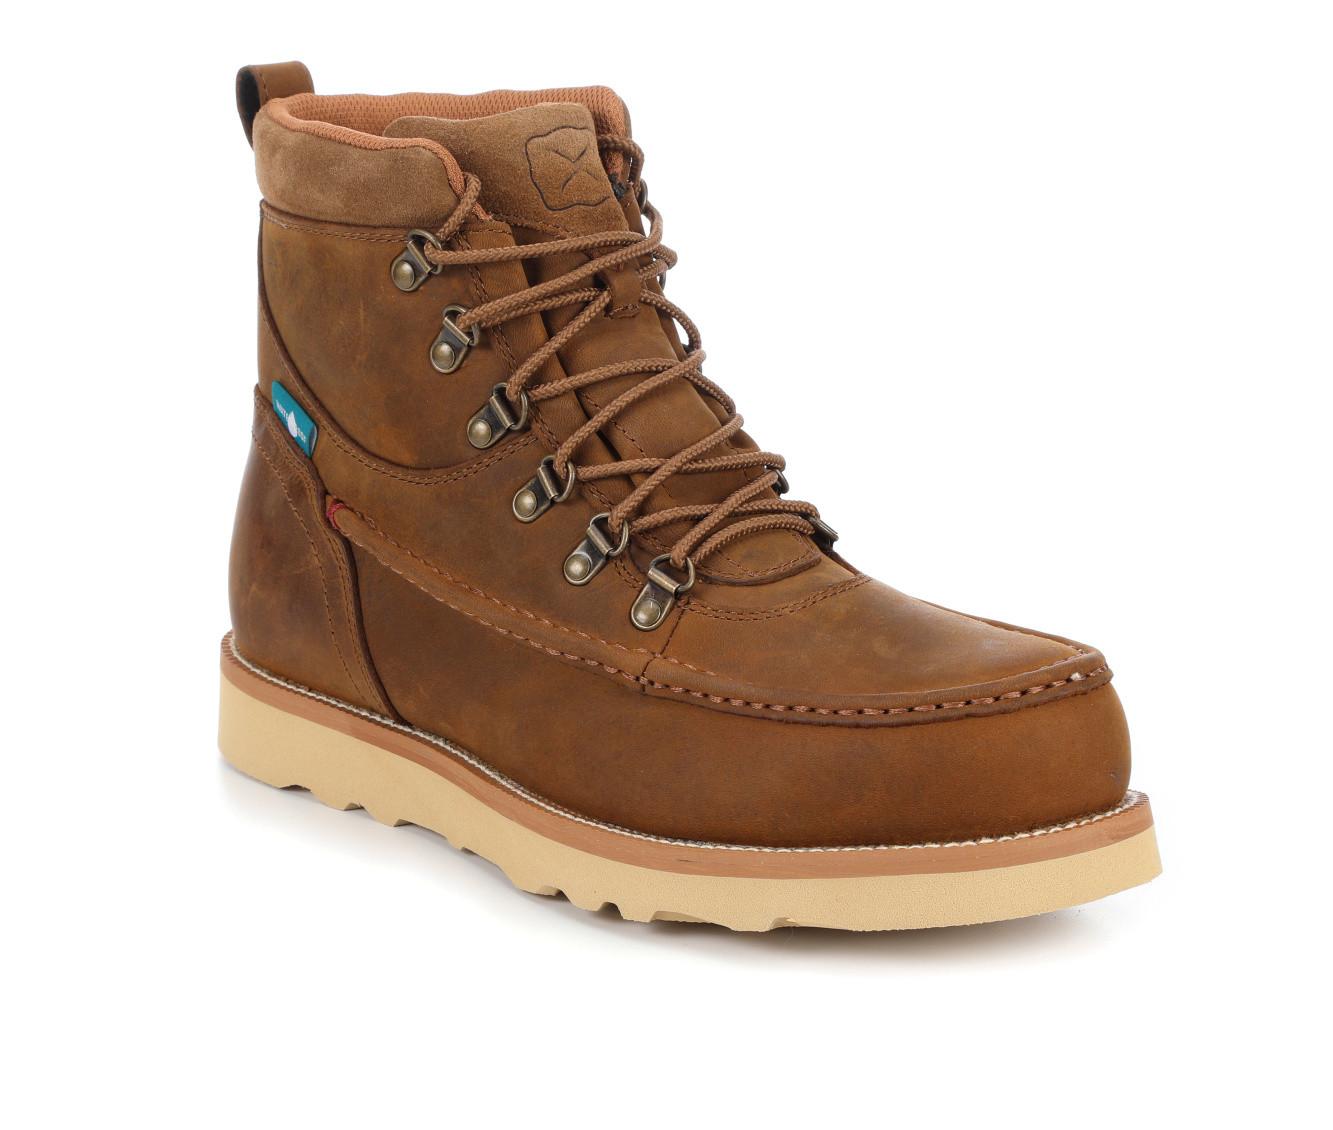 Men's TWISTED X 6" Work Wedge Sole Boot Work Boots